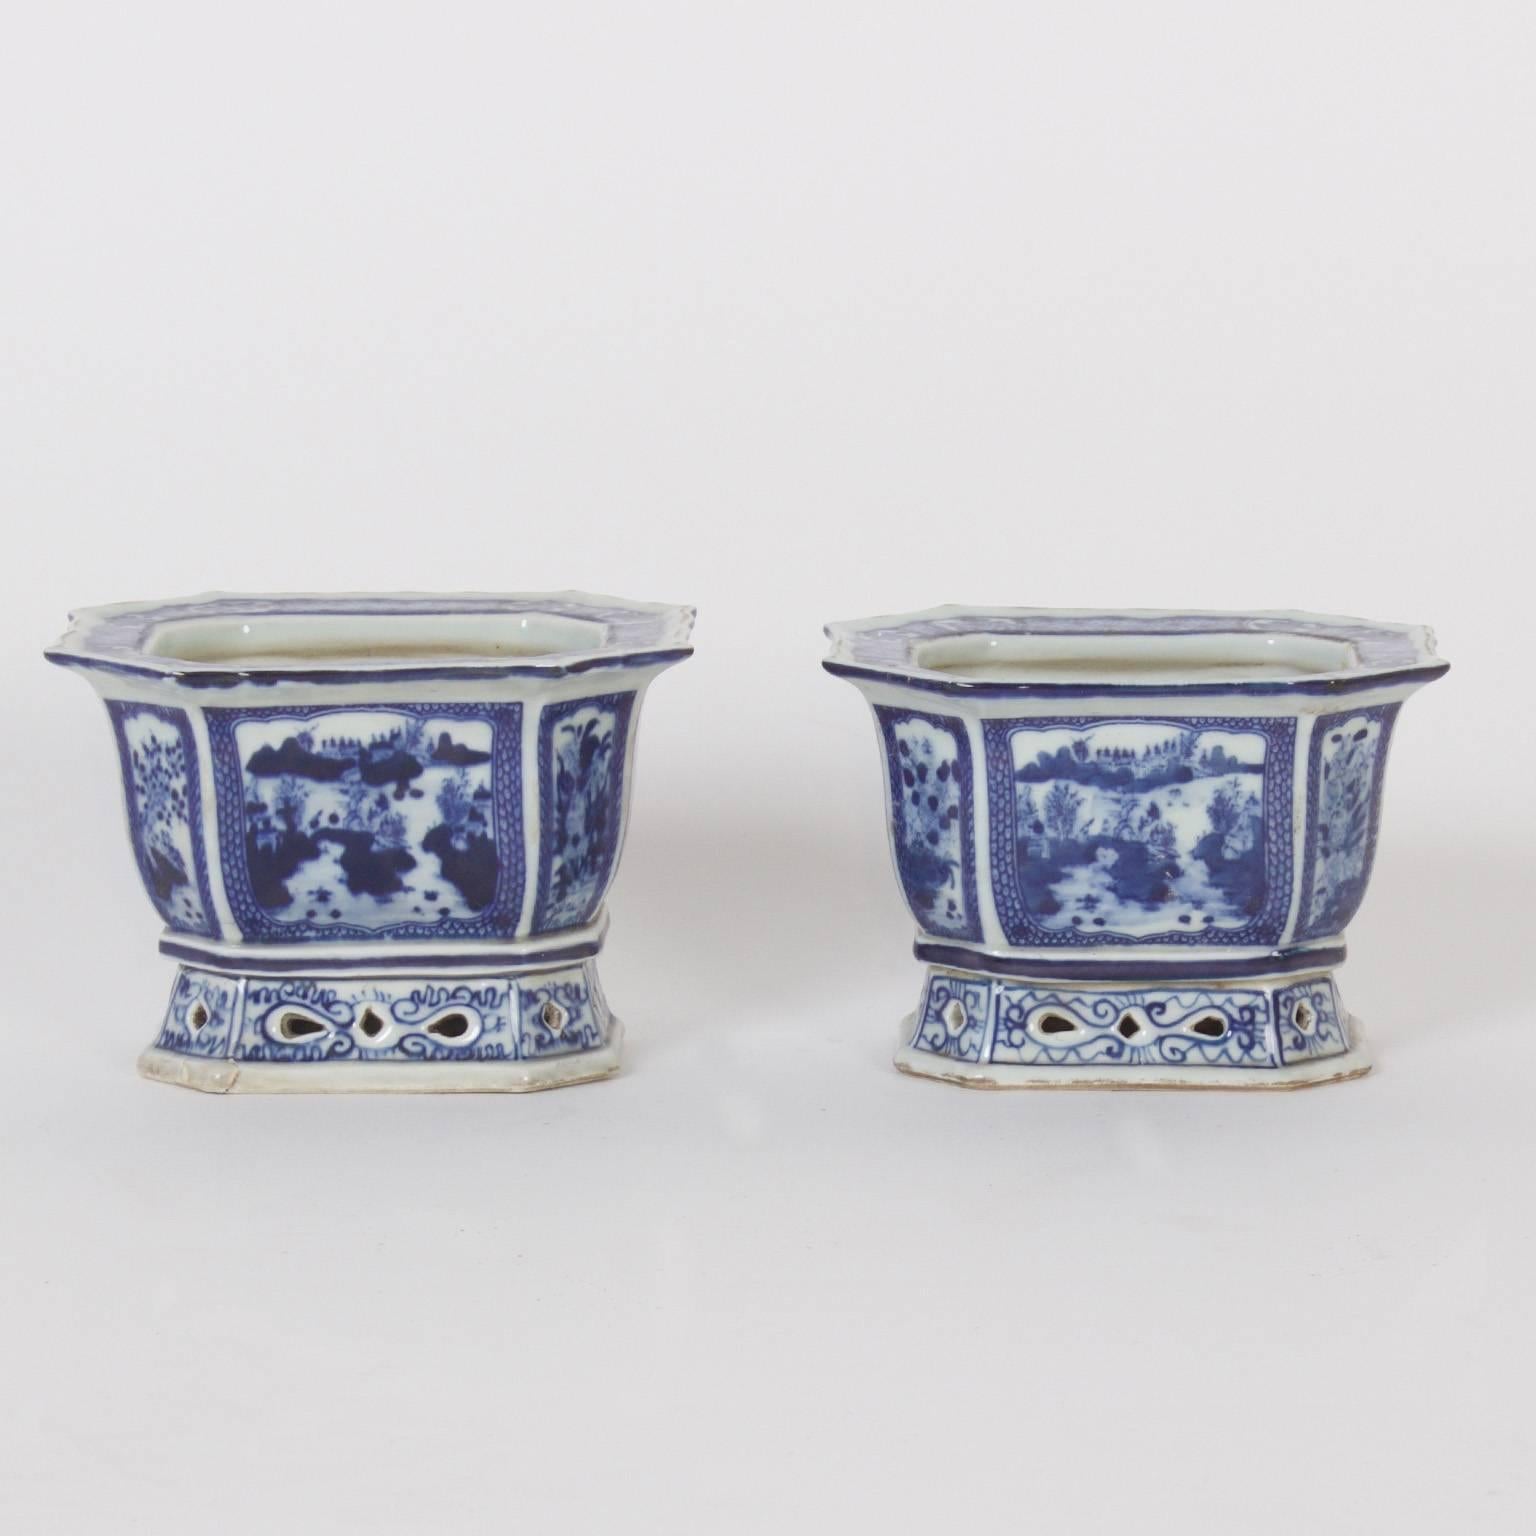 Diminutive and fine Chinese blue and white porcelain planters with a scalloped, rectangular, octagonal form and alternating floral and landscape decorated panels.
 